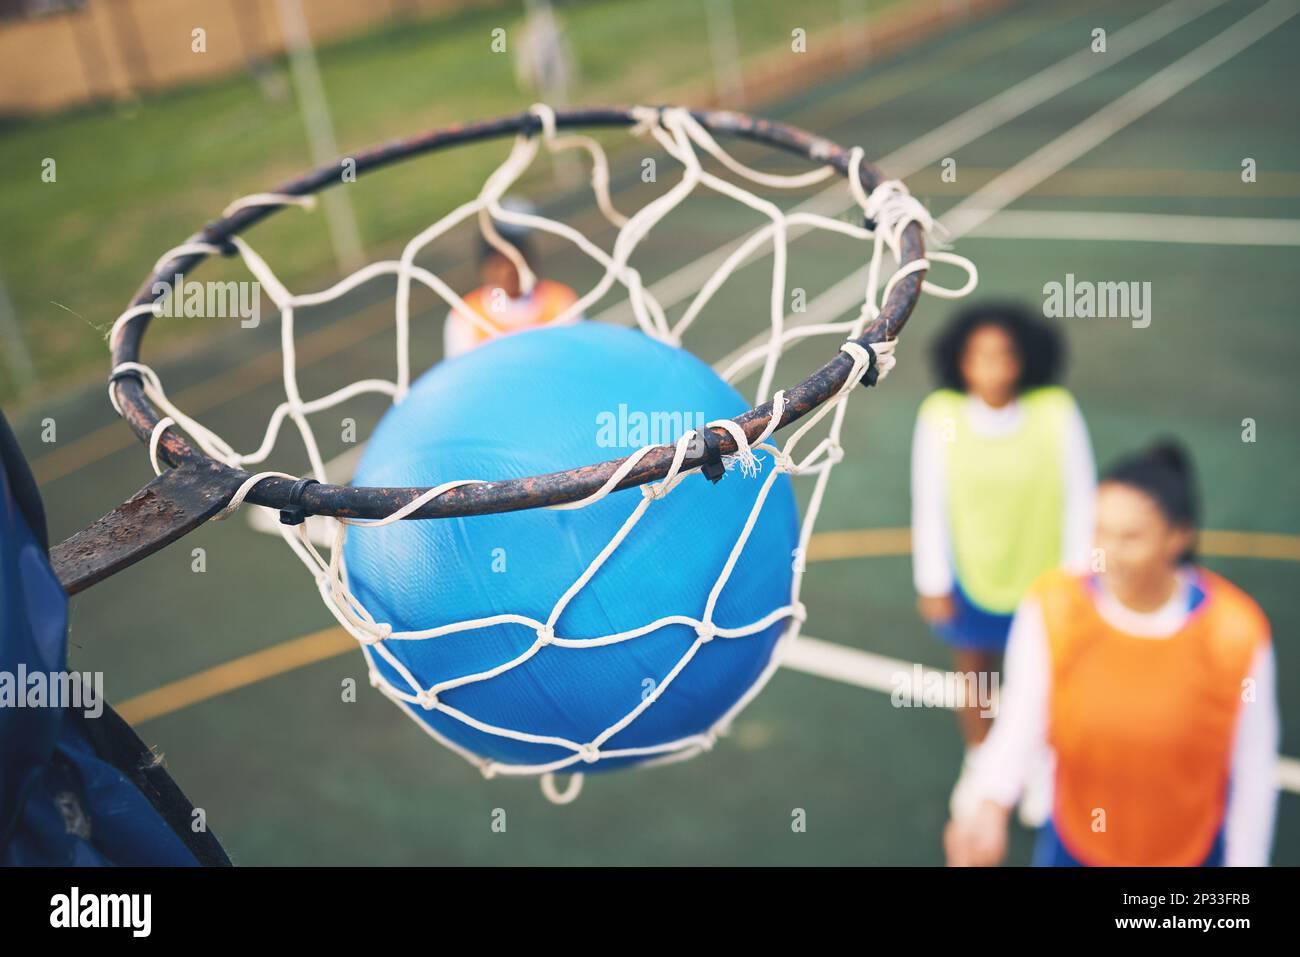 Ball in net, netball and sports outdoor with team, fitness and active lifestyle with athlete on court. Sport, professional club and people playing Stock Photo